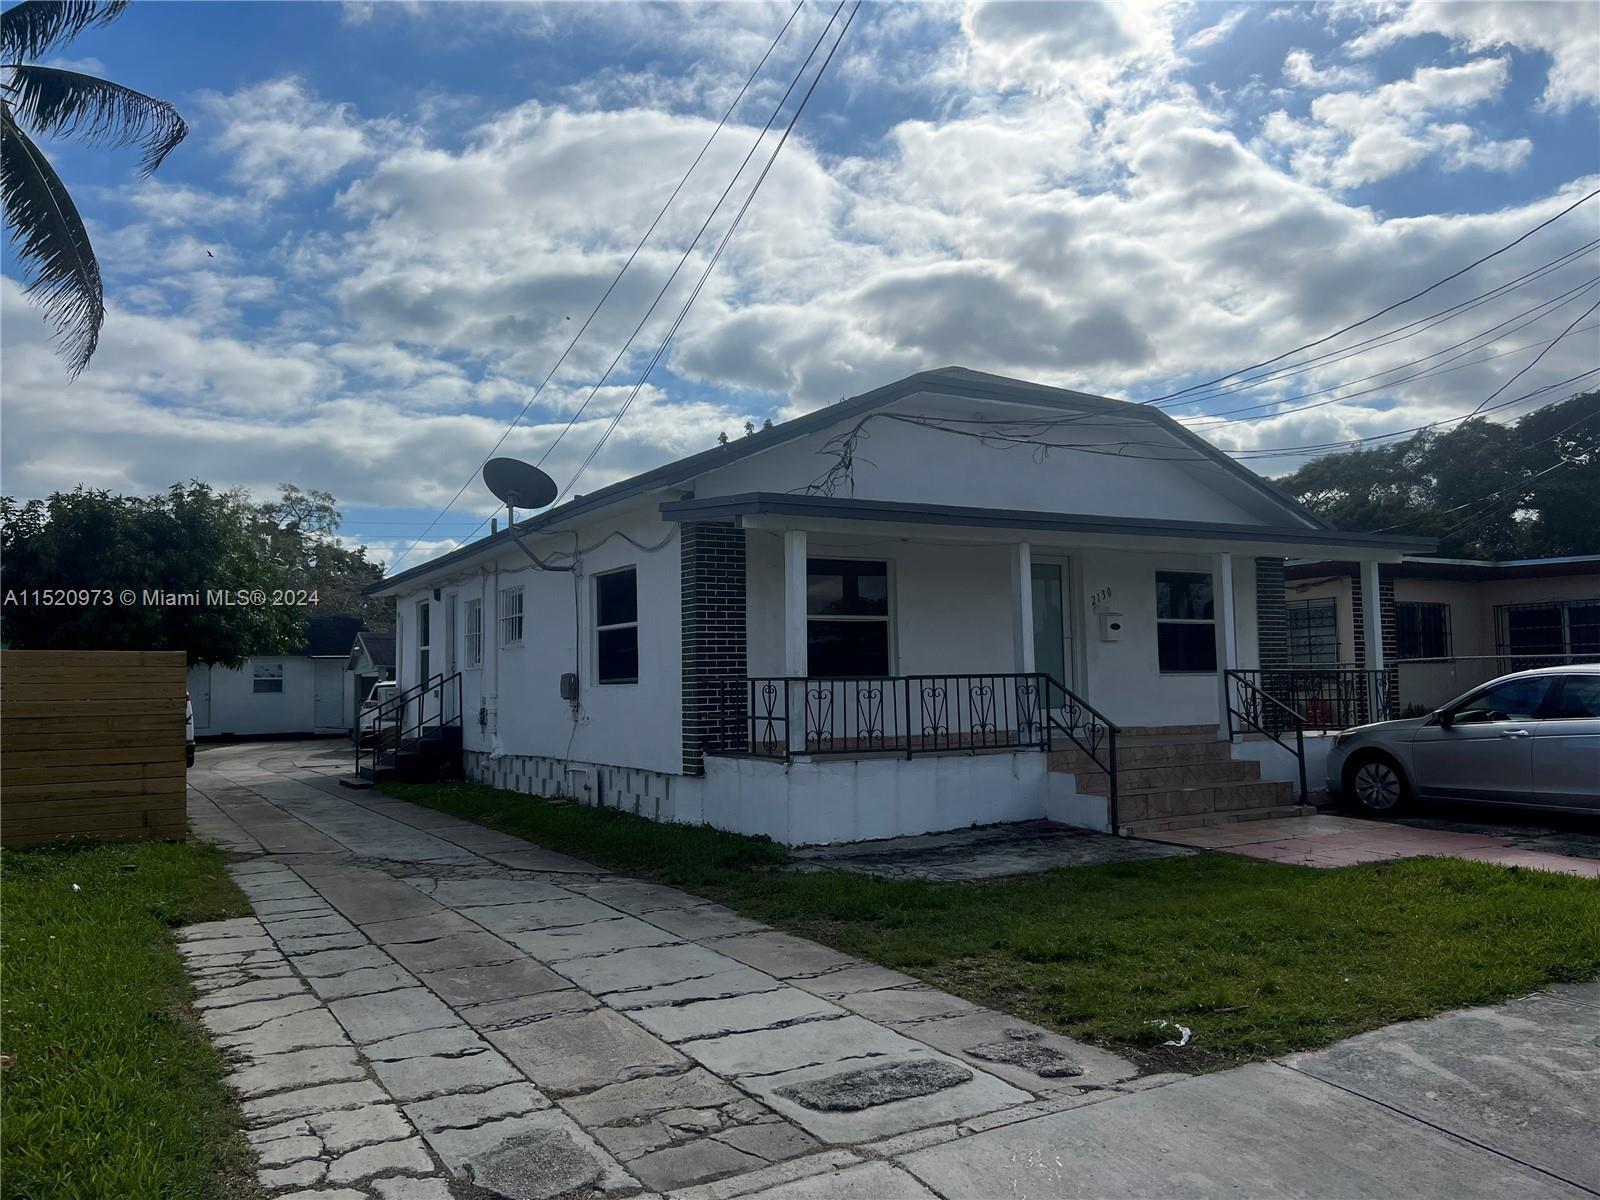 Photo of 2130 NW 27th St in Miami, FL